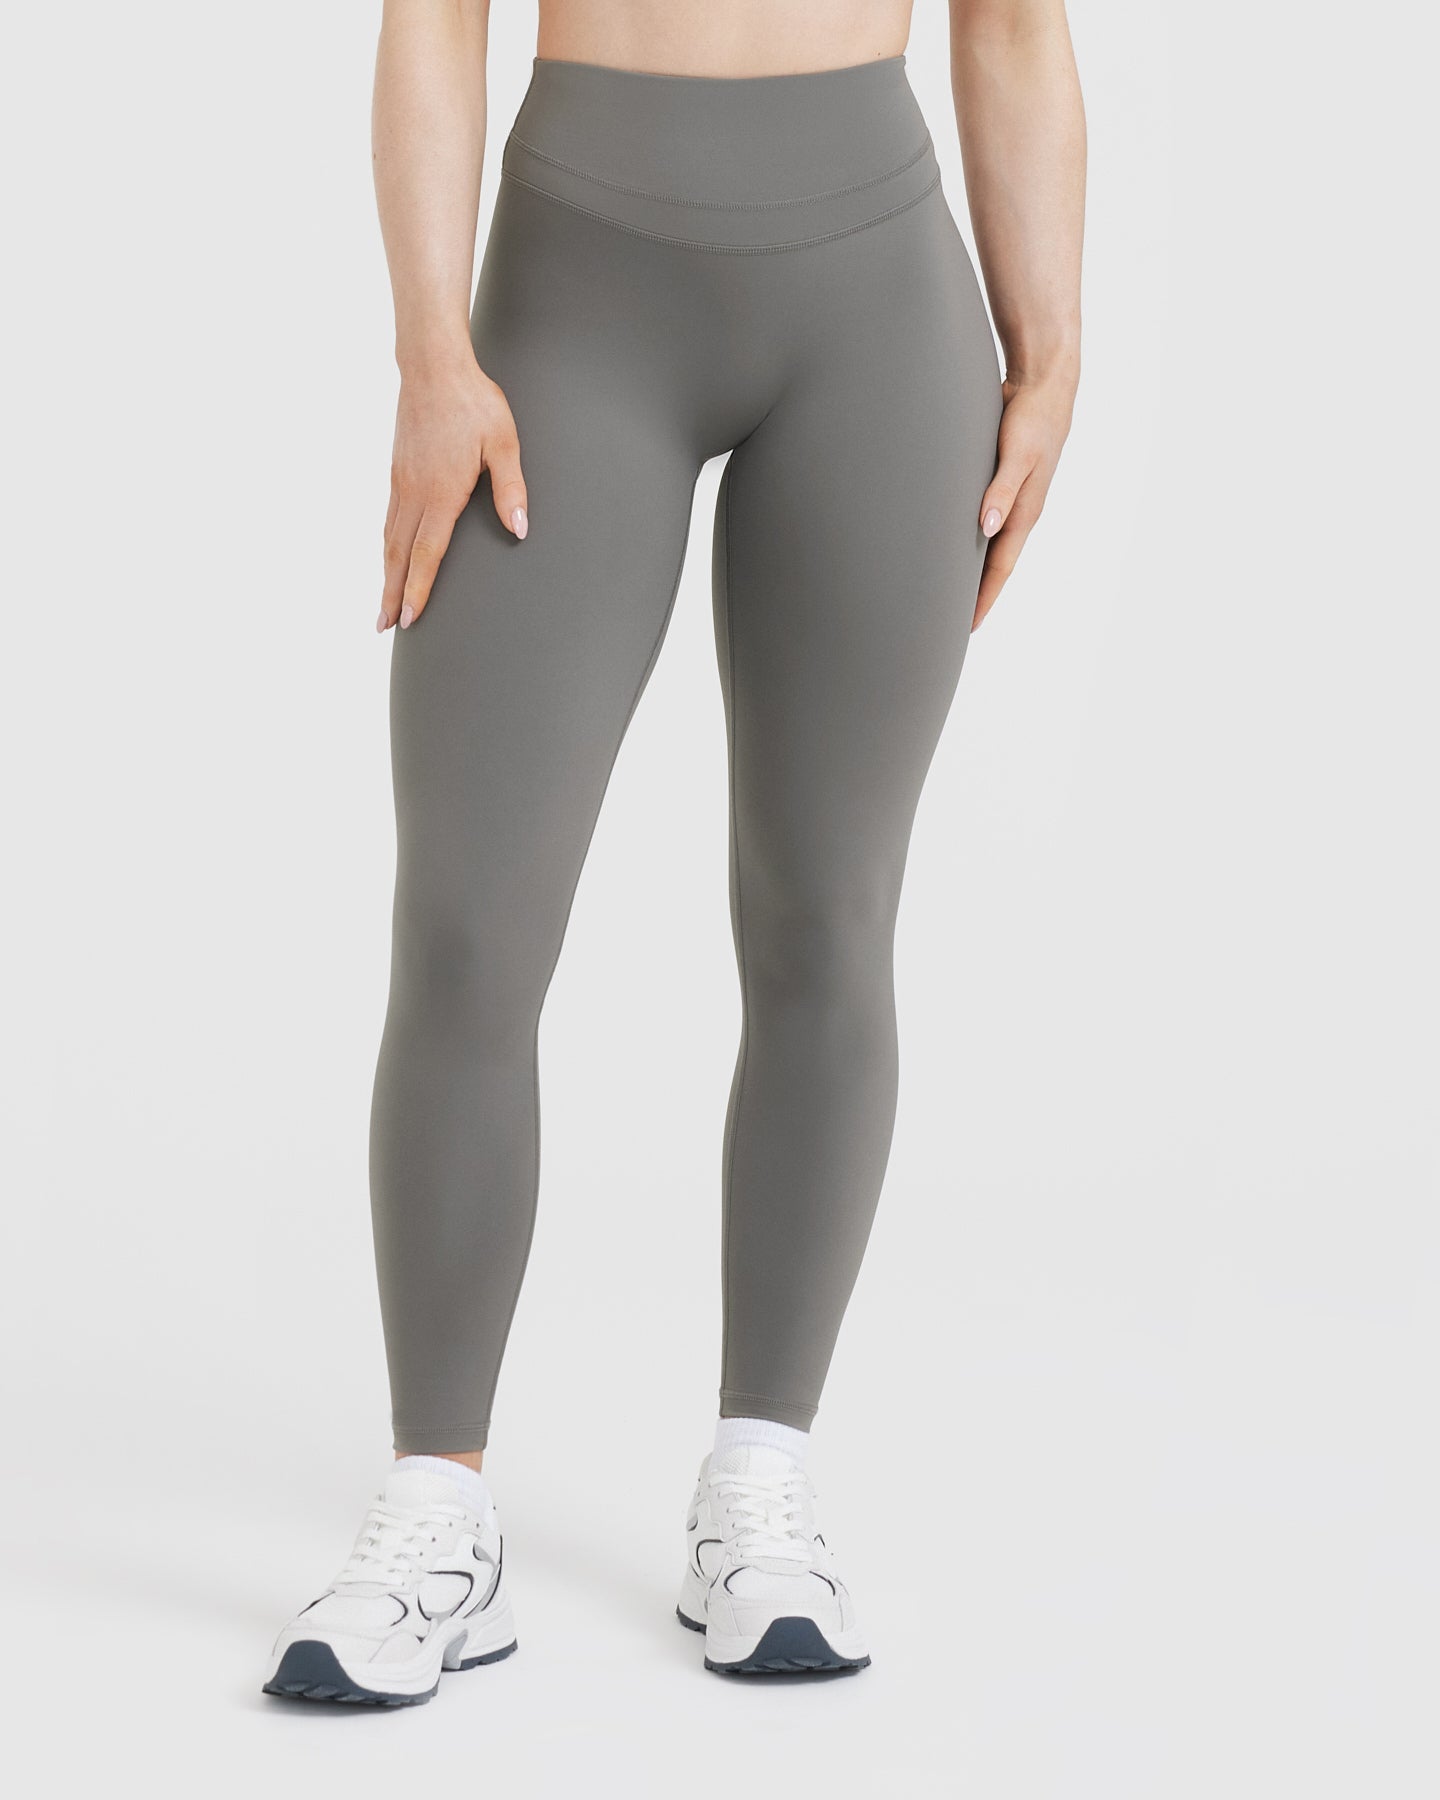 Self Reflection Reflective High Waisted Leggings in Grey & Neon